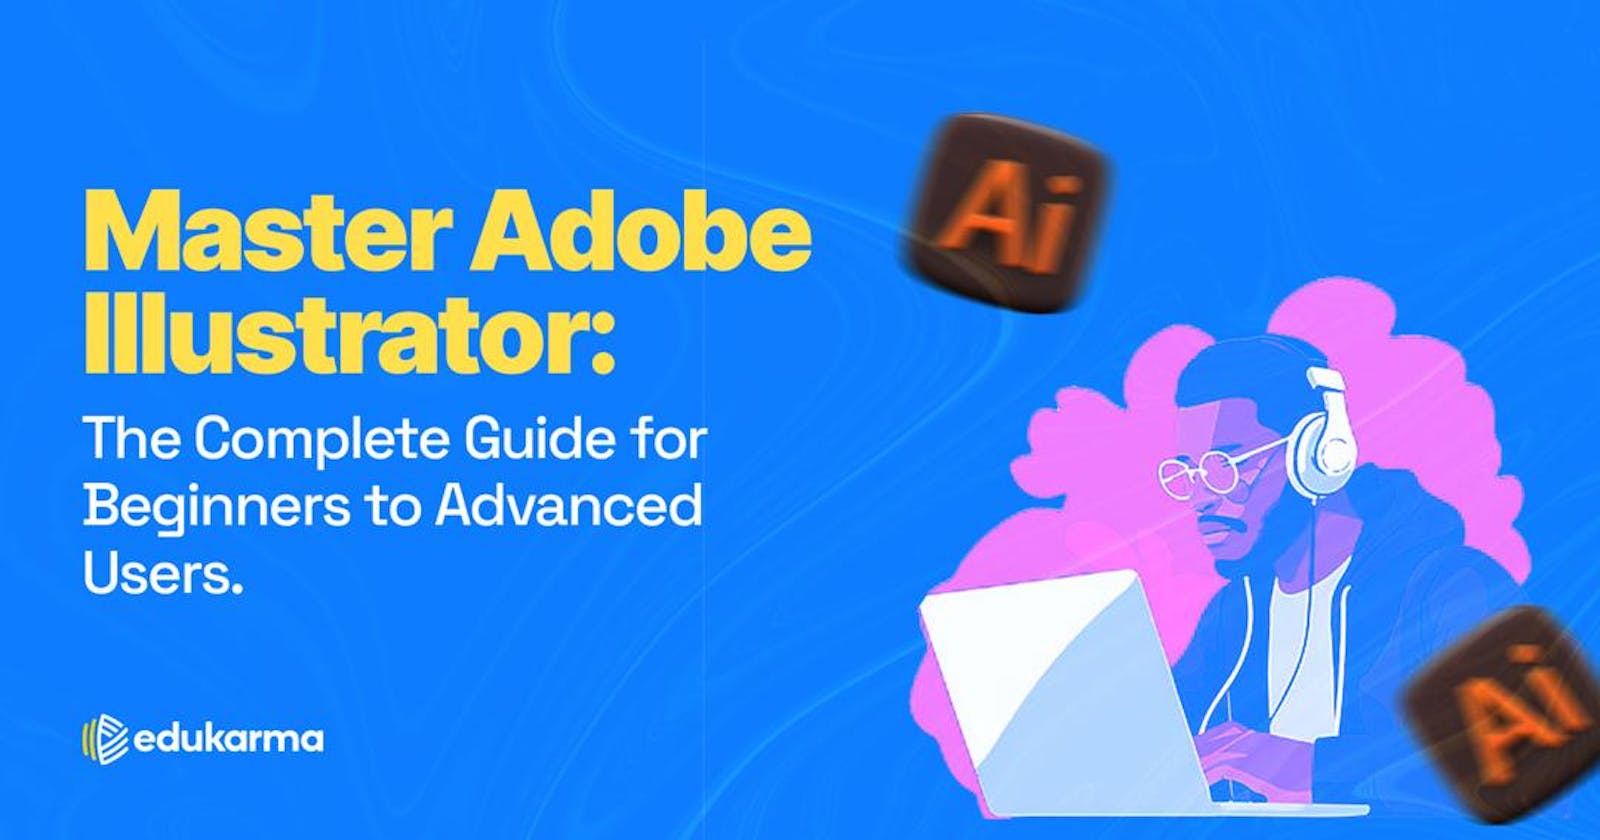 Master Adobe Illustrator: The Complete Guide for Beginners to Advanced Users